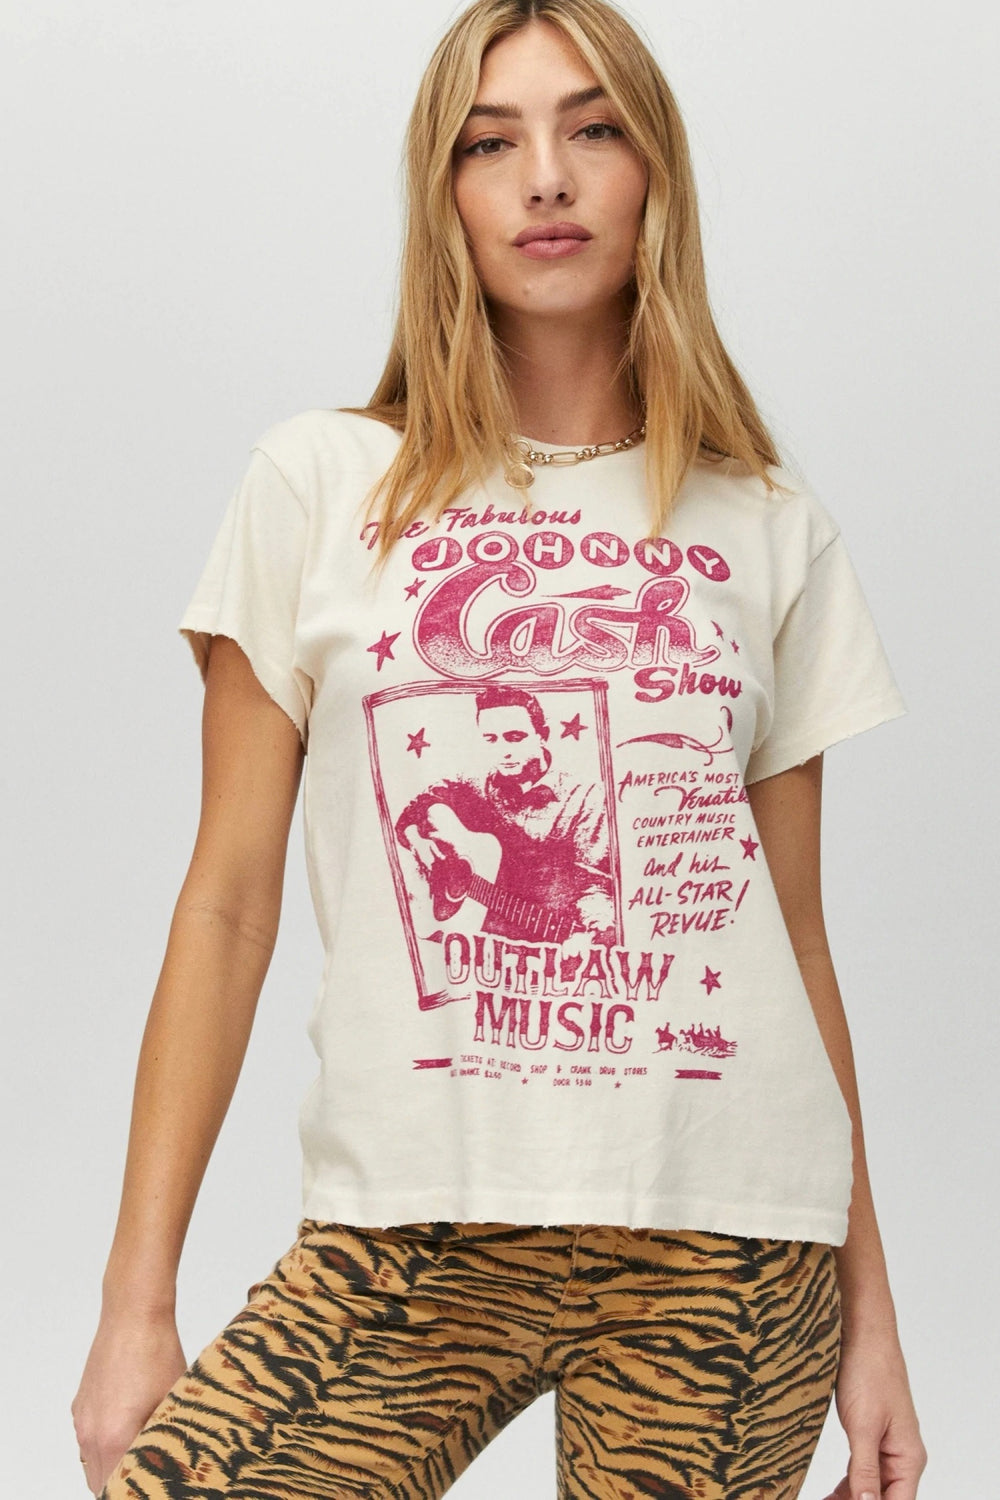 Sand Johnny Cash Outlaw Music Tour Tee